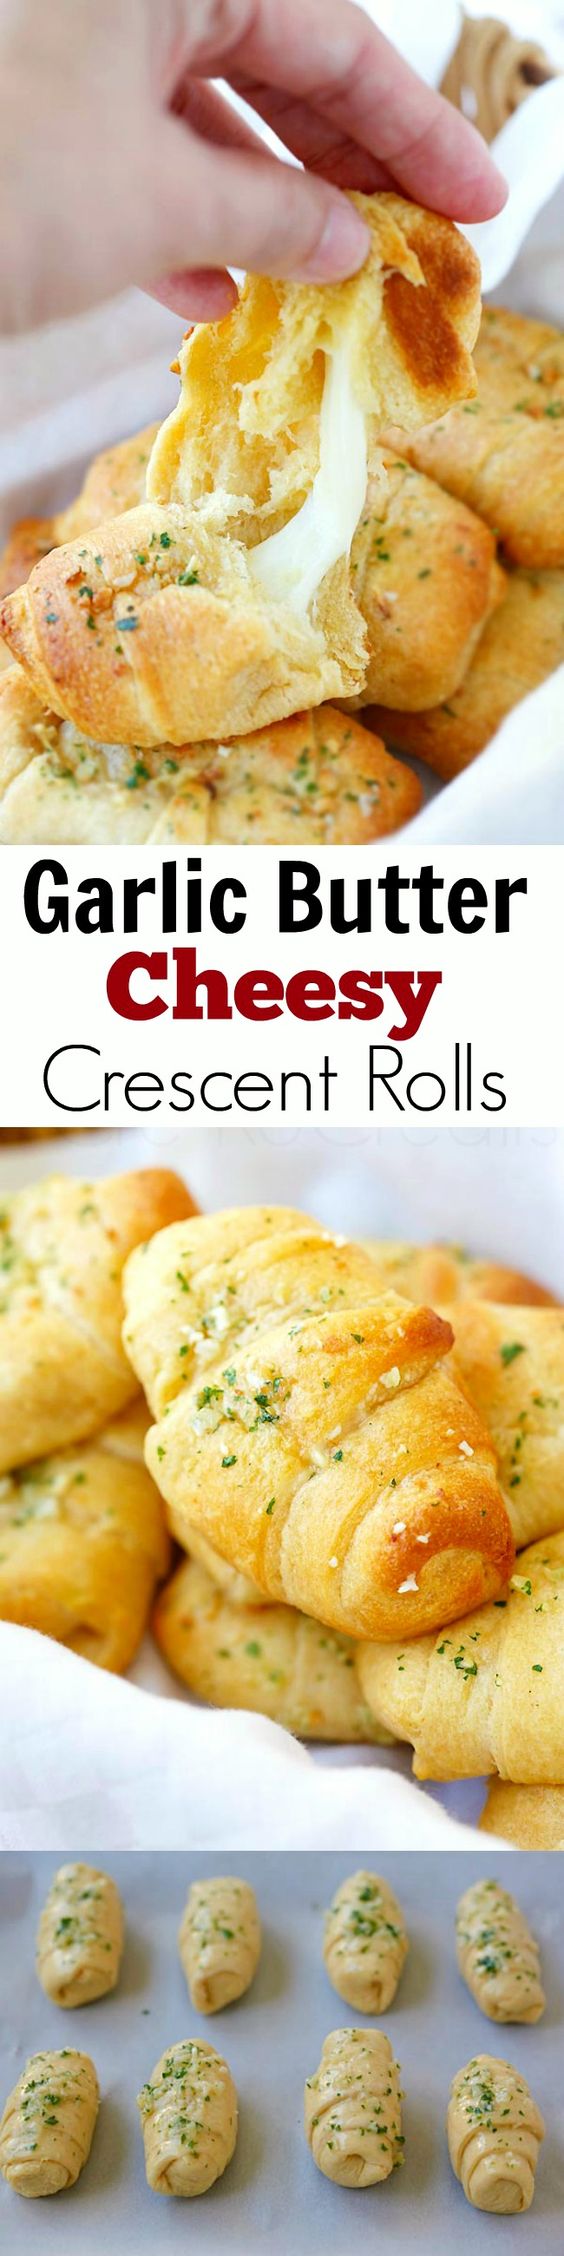 Garlic Butter Cheesy Crescent Rolls - amazing crescent rolls loaded with Mozzarella cheese and topped with garlic butter, takes 20 mins!!! | rasamalaysia.com